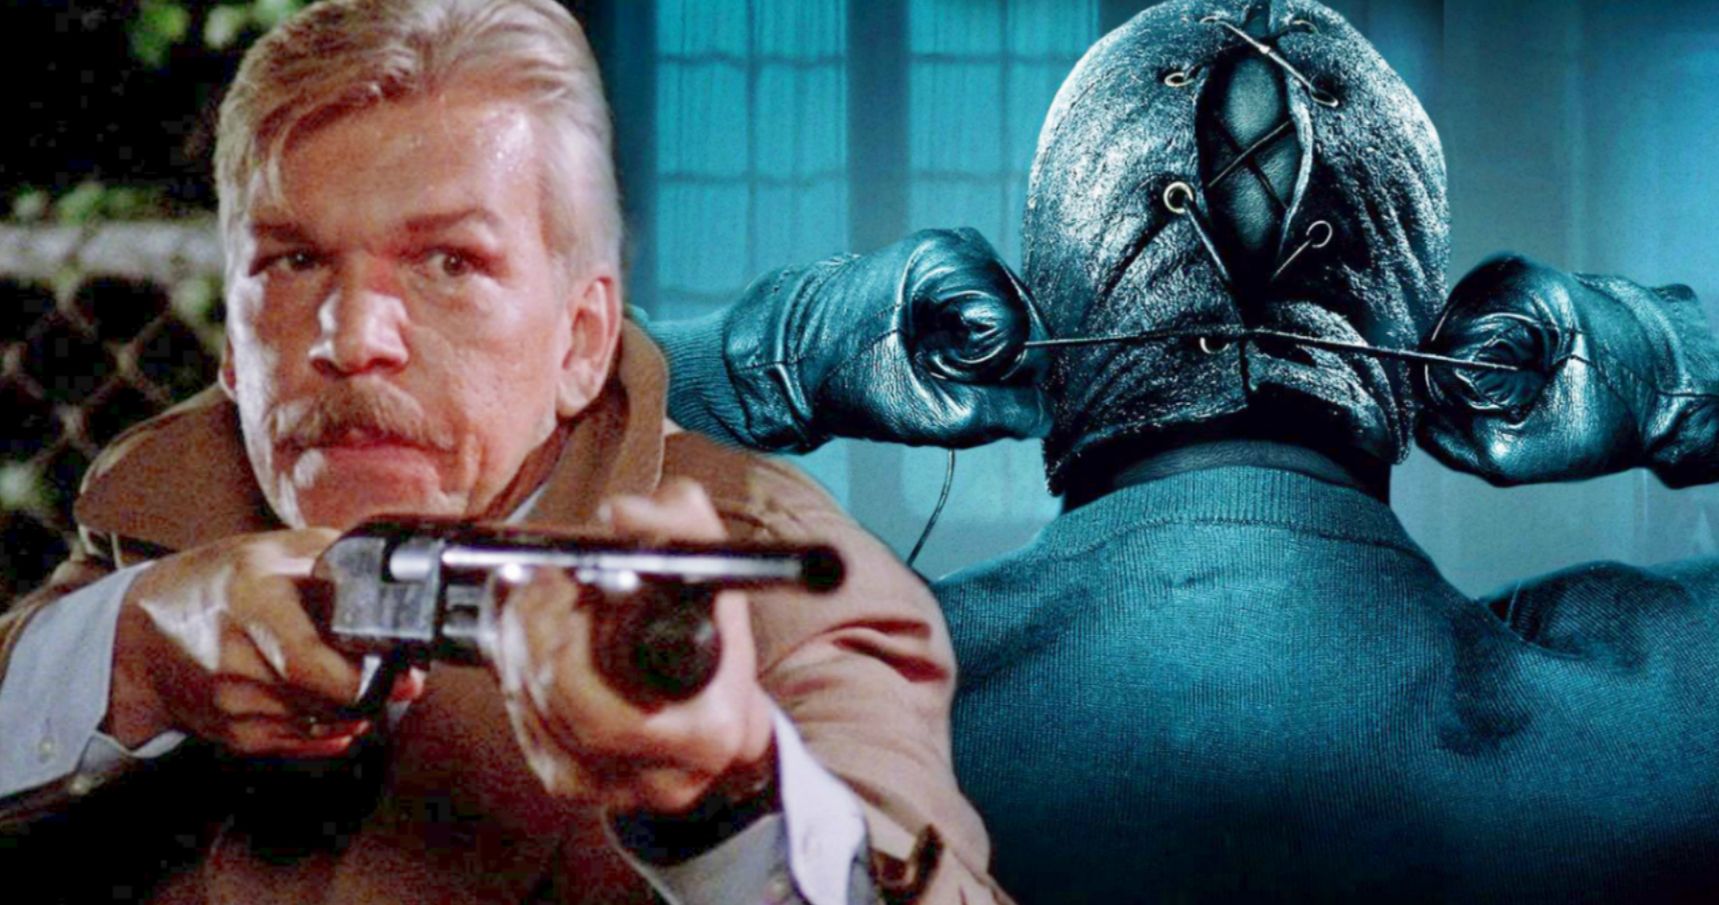 The Collector 3: The Collected Wants Horror Legend Tom Atkins in Major Role